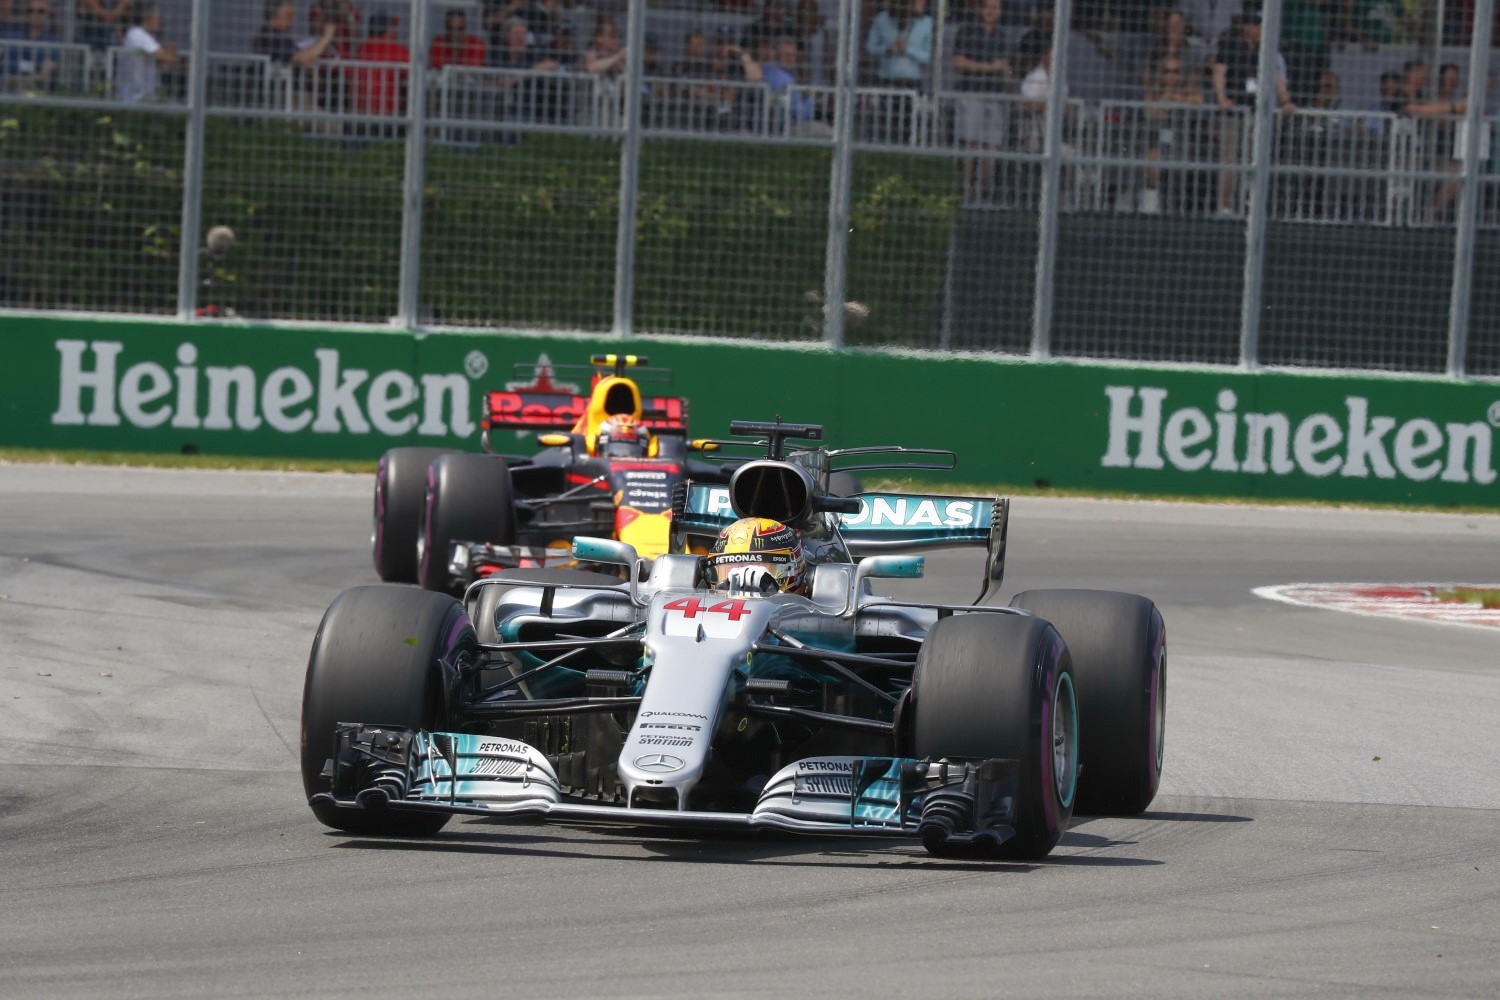 Lewis Hamilton on an easy Sunday drive in Montreal after Verstappen took Vettel out of any chance to win by taking his front wing off 